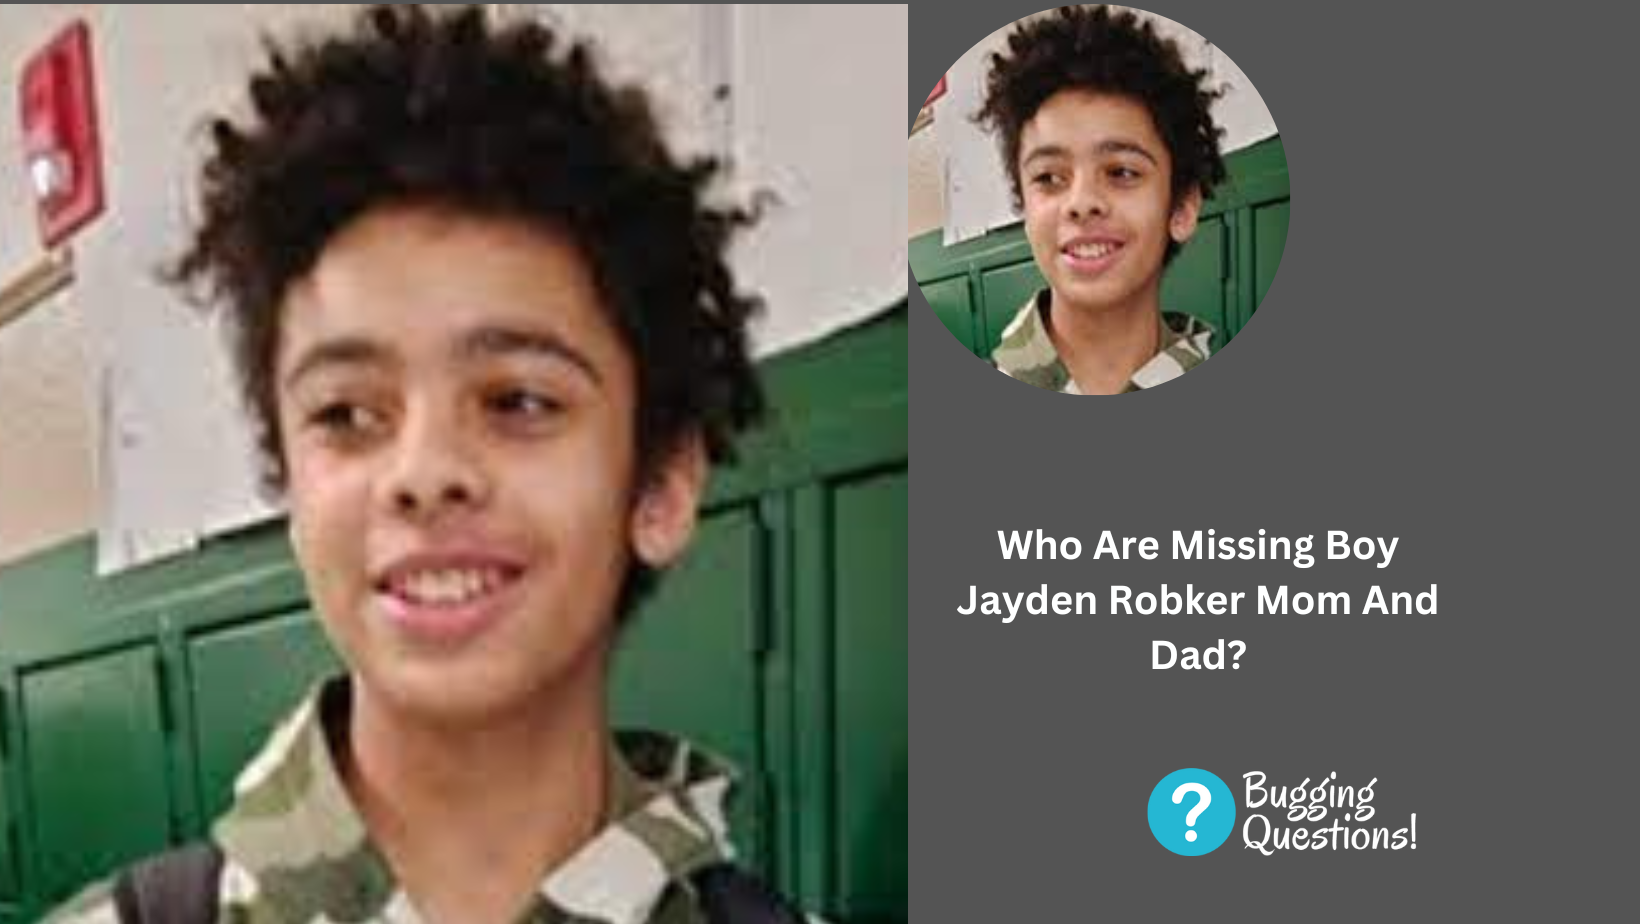 Who Are Missing Boy Jayden Robker Mom And Dad?